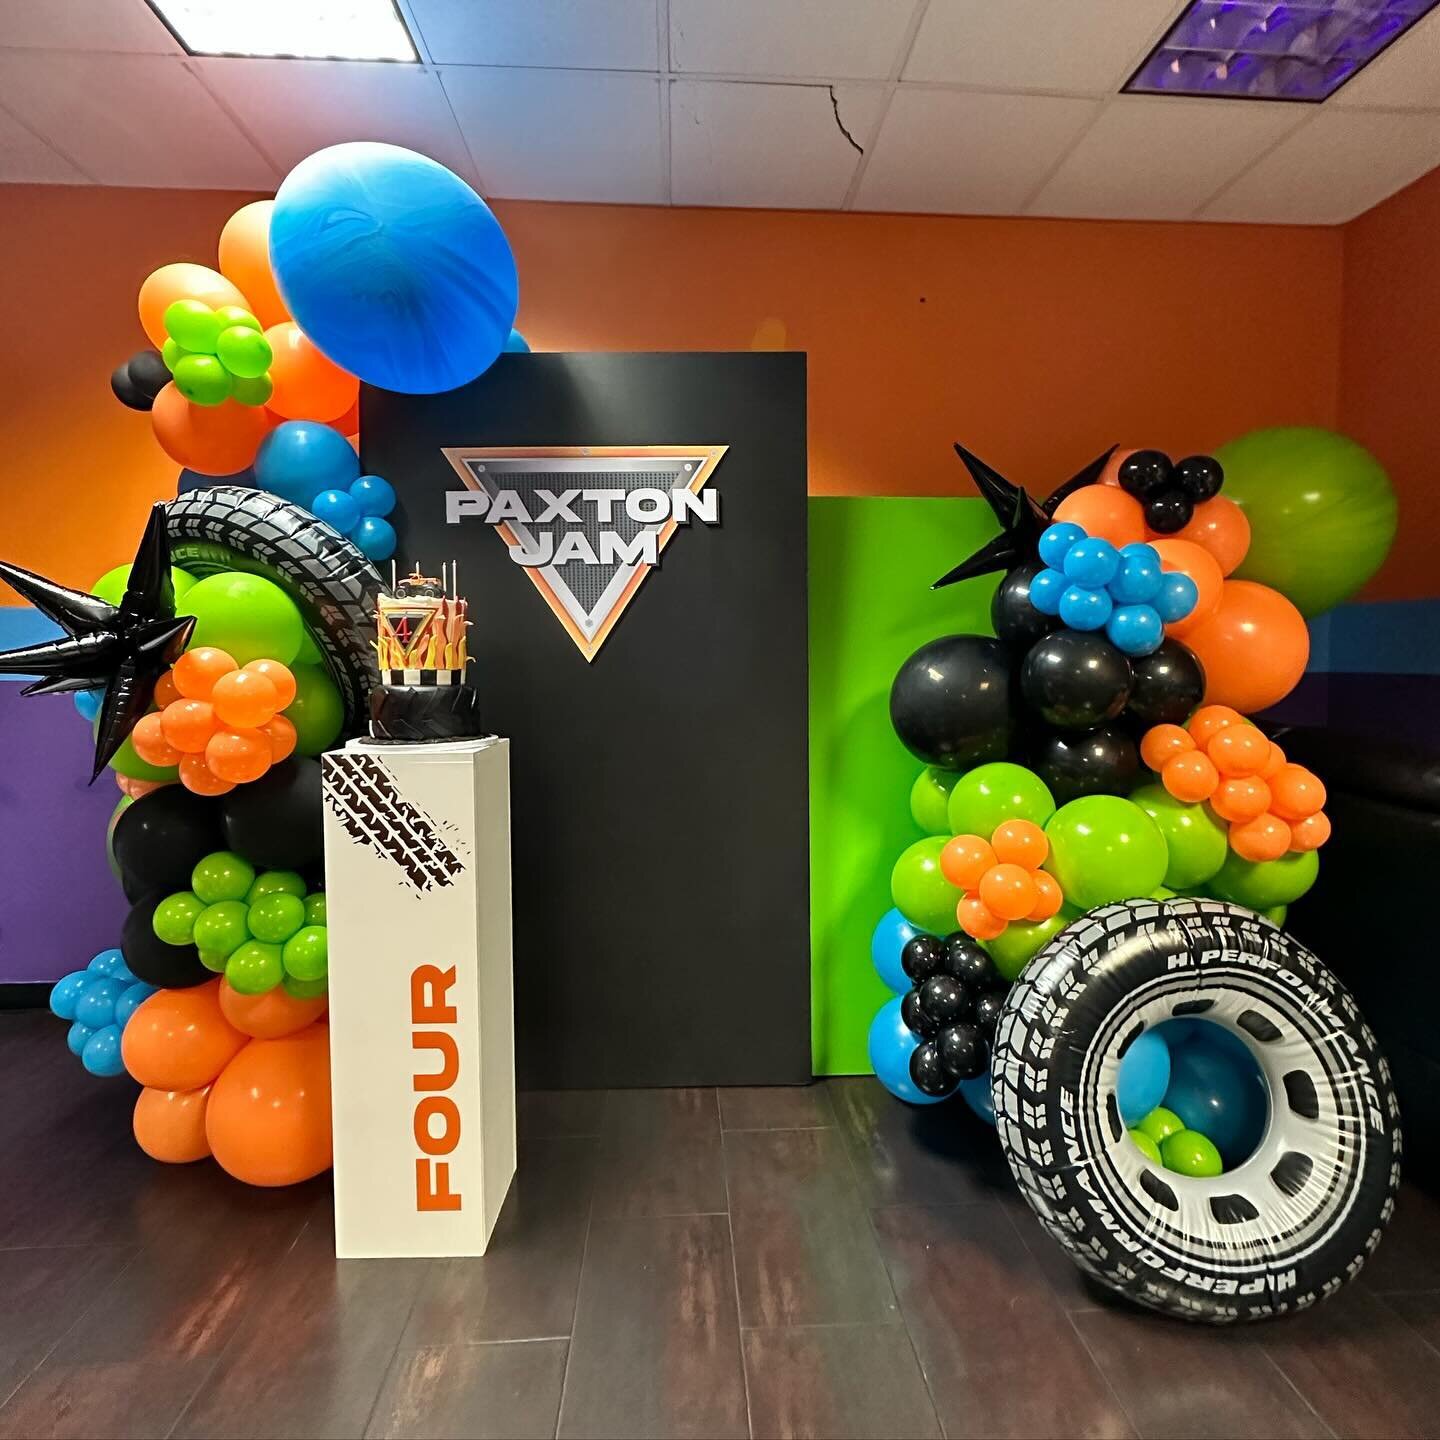 Proof you can make a beautiful cohesive party in an event room at a trampoline park 😂 #monsterjamparty #monstertruckparty #boysbirthday #arizonaeventplanner #arizonabirthday #girlbirthday #balloongarland #organicballoons #organicballoongarland #phoe